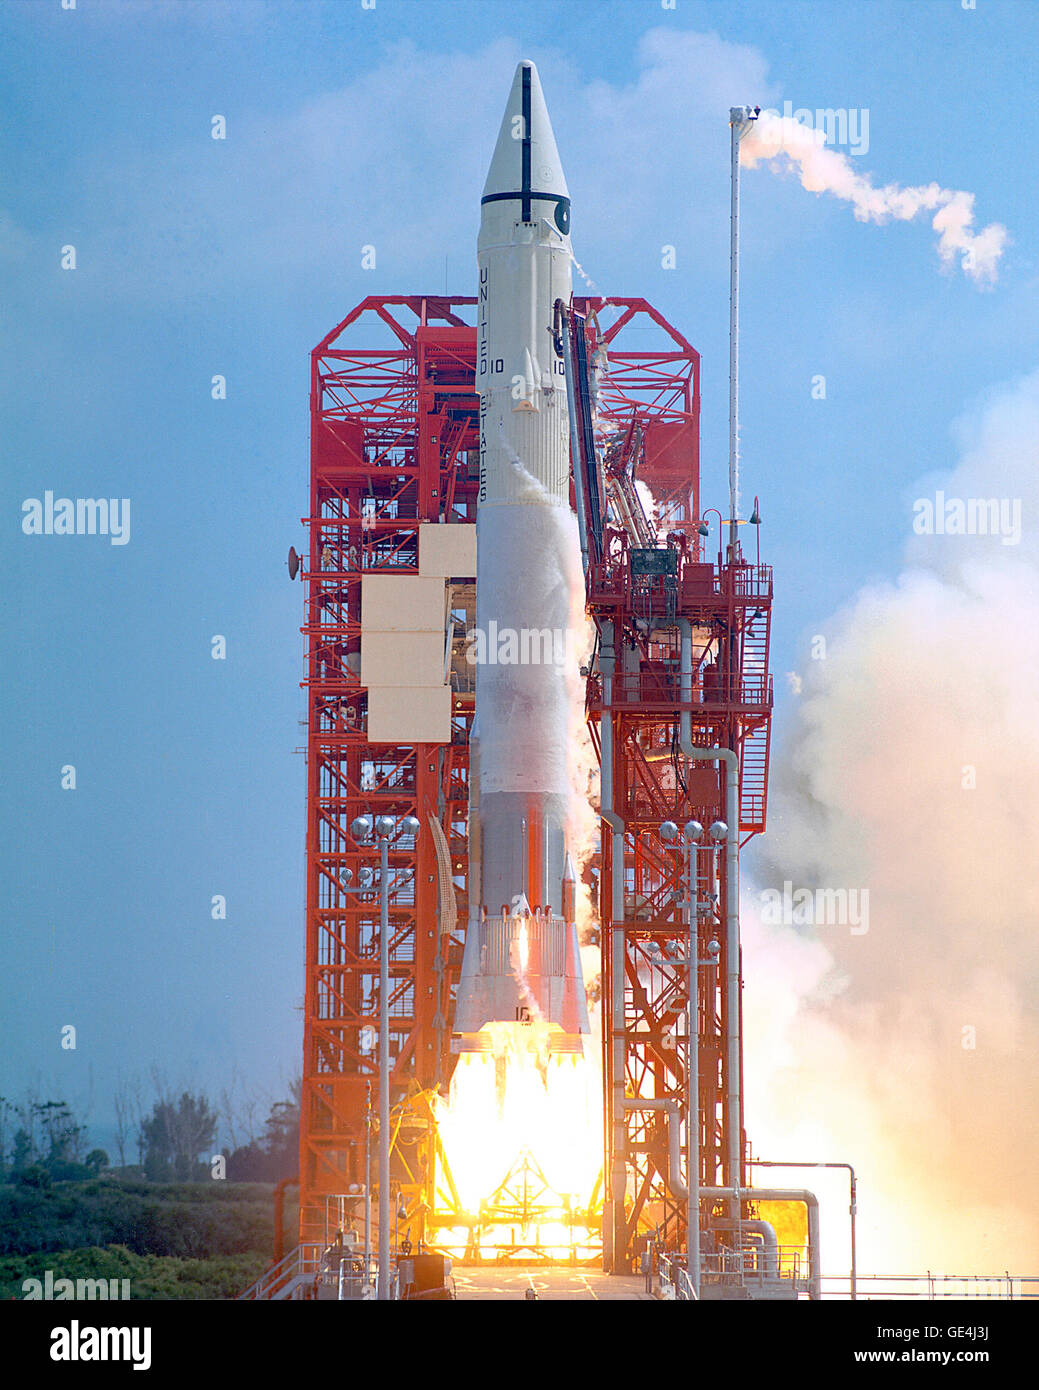 The Atlas-Centaur 10, carrying the Surveyor 1 spacecraft, lifting off from Pad 36A. The Surveyor 1 mission scouted the lunar surface for future Apollo manned lunar landing sites.   Image # : 66PC-0113  Date: May 30, 1966 Stock Photo